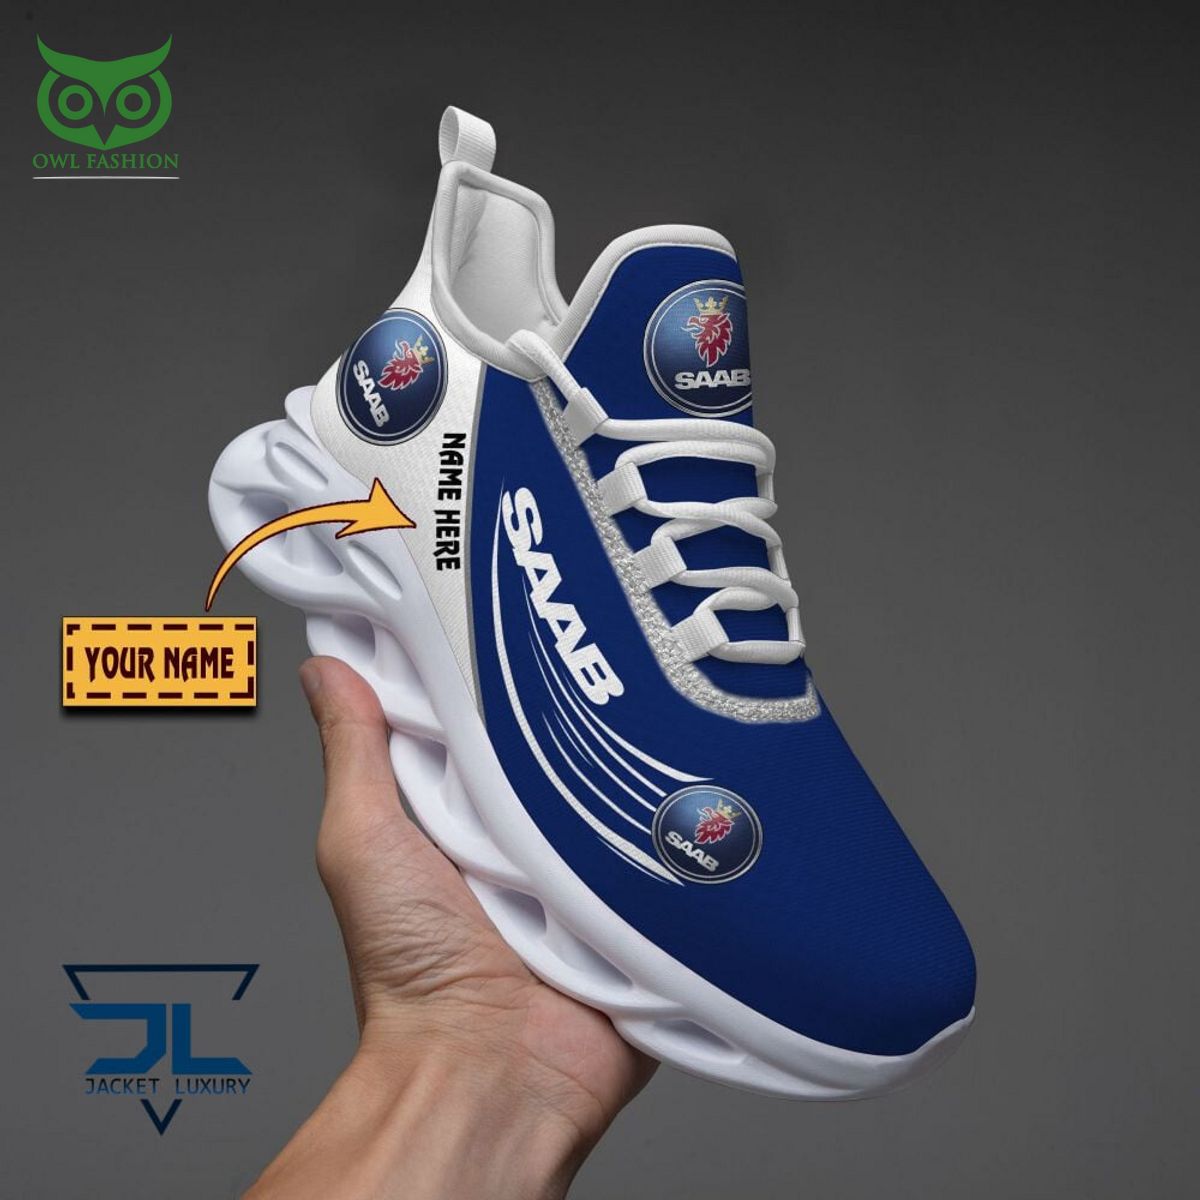 Saab Automobile Car Brand Personalized Max Soul Sneakers